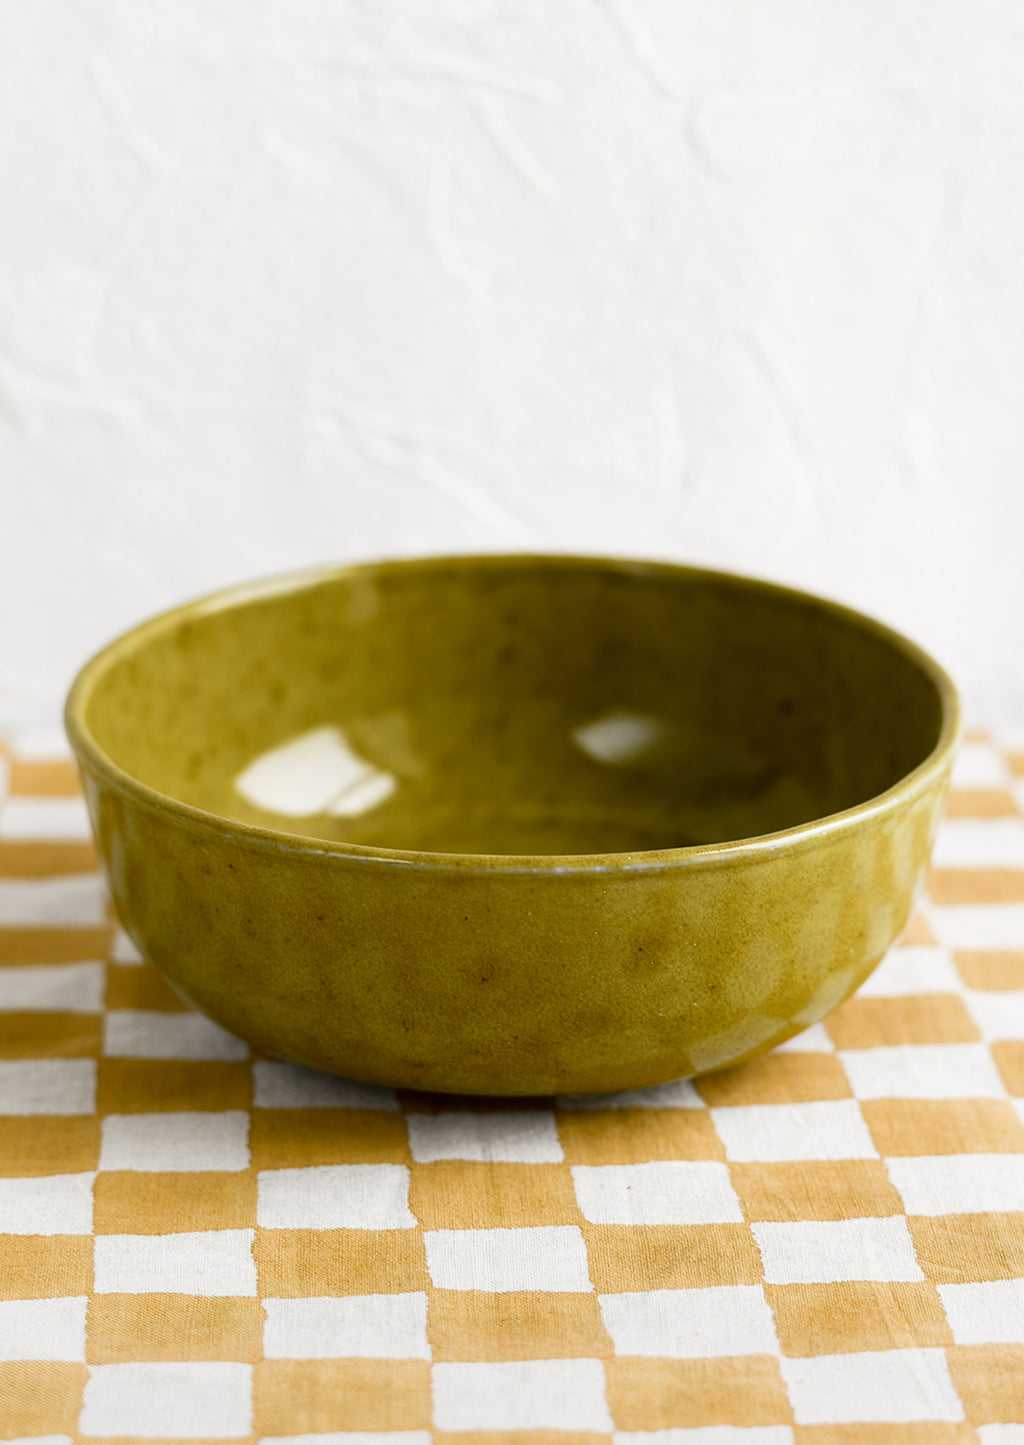 Serving Bowl: A large ceramic serving bowl in mossy green glaze.